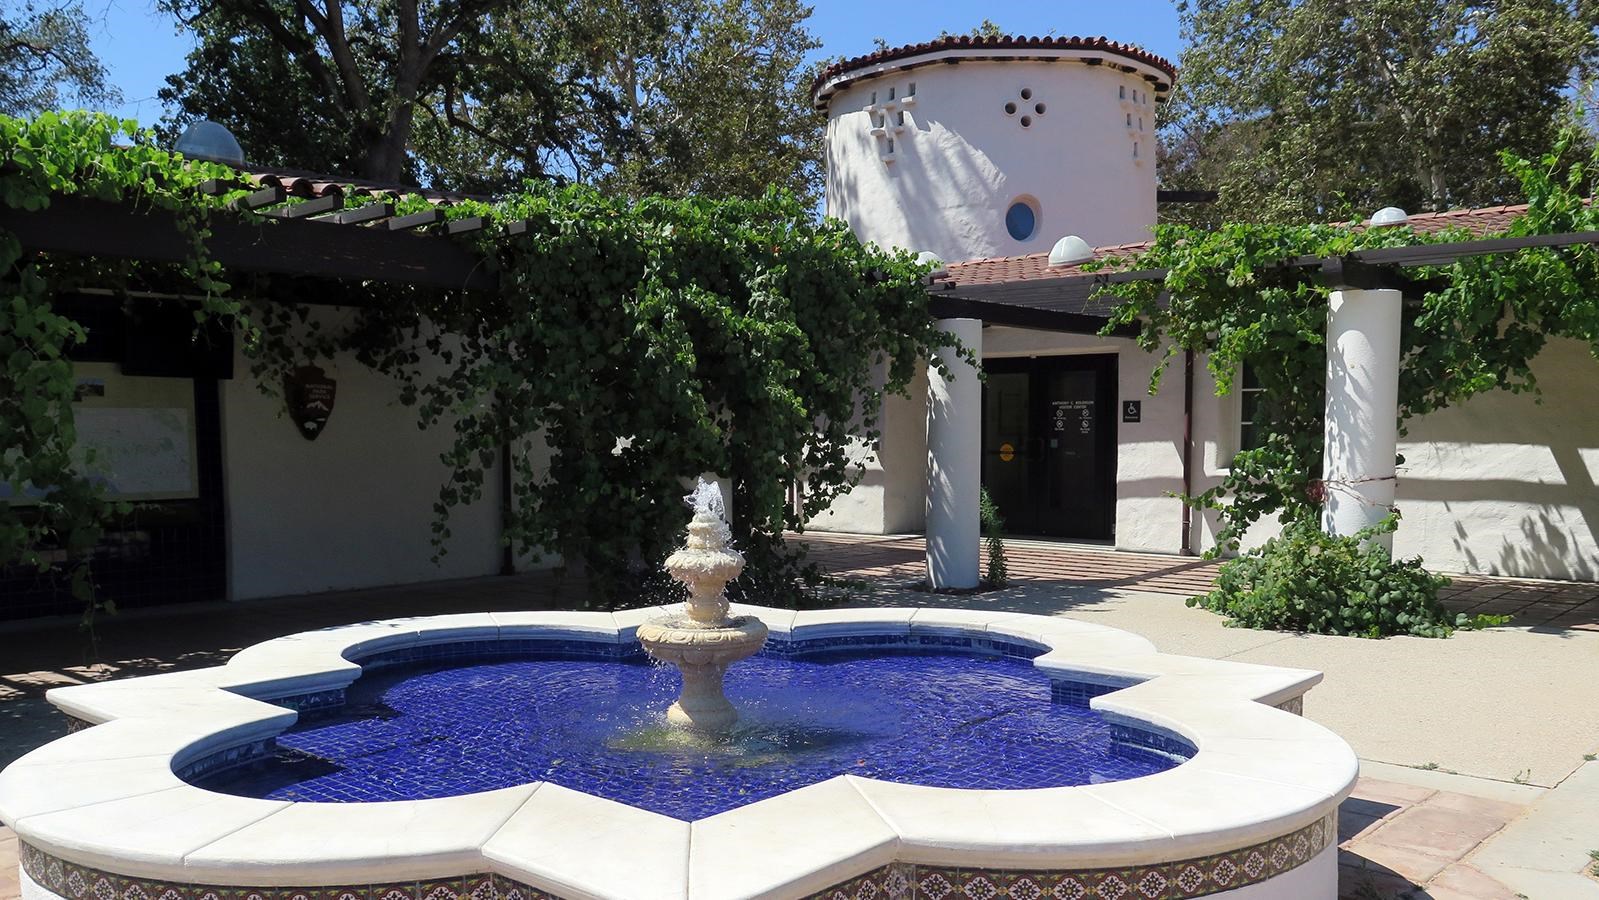 White fountain in a courtyard surrounded by grape vines outside a white building.